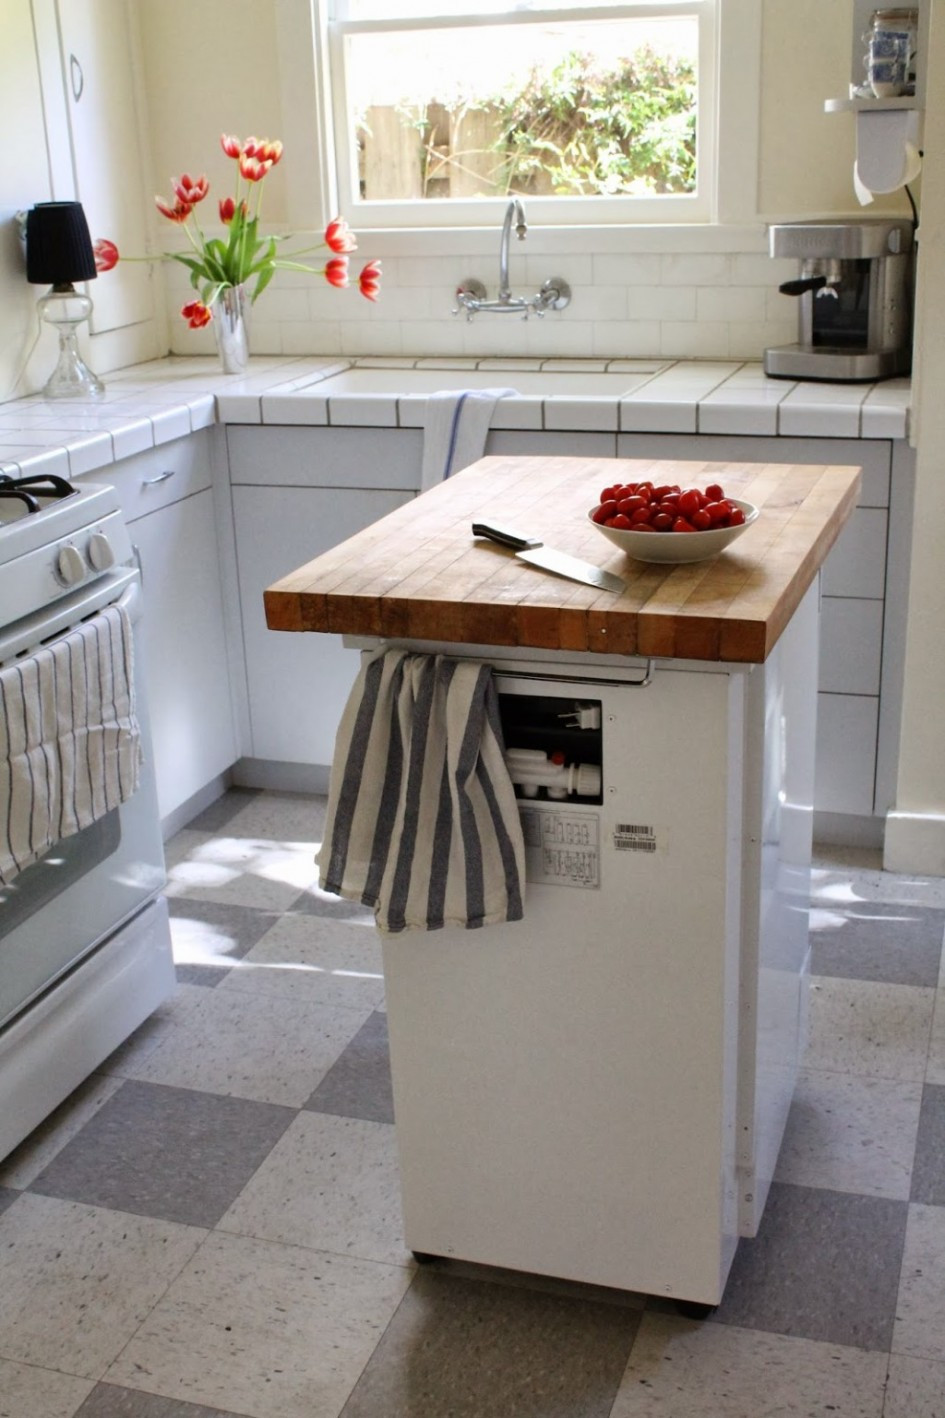 Small Mobile Kitchen Island
 5 Inexpensive Ways to Make Your Small Kitchen More Functional